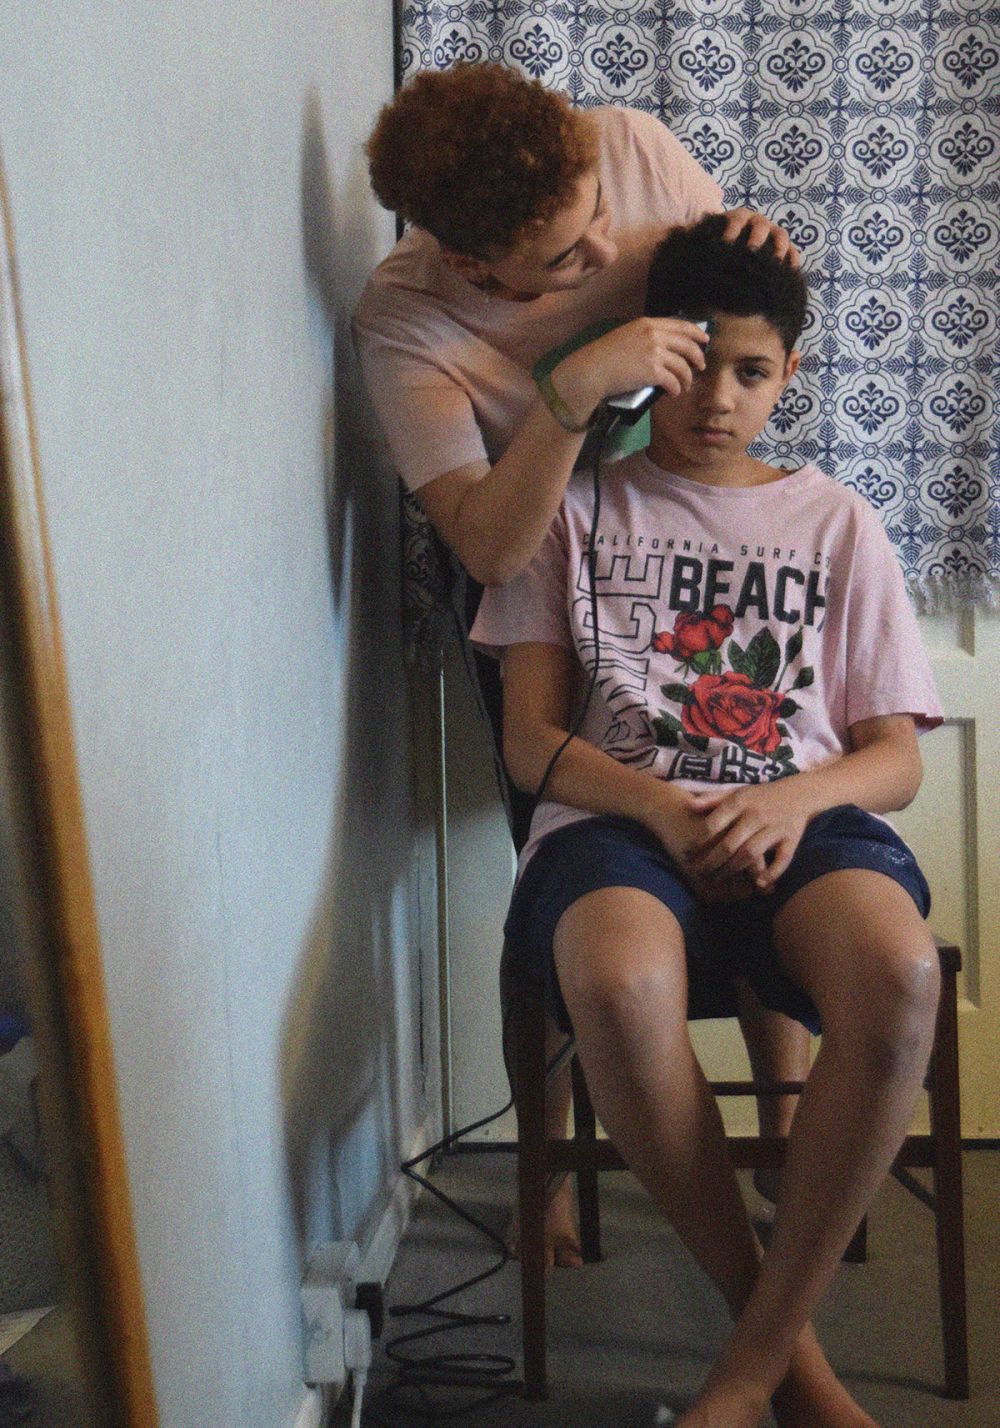 A photograph depicting a young boy getting a haircut.